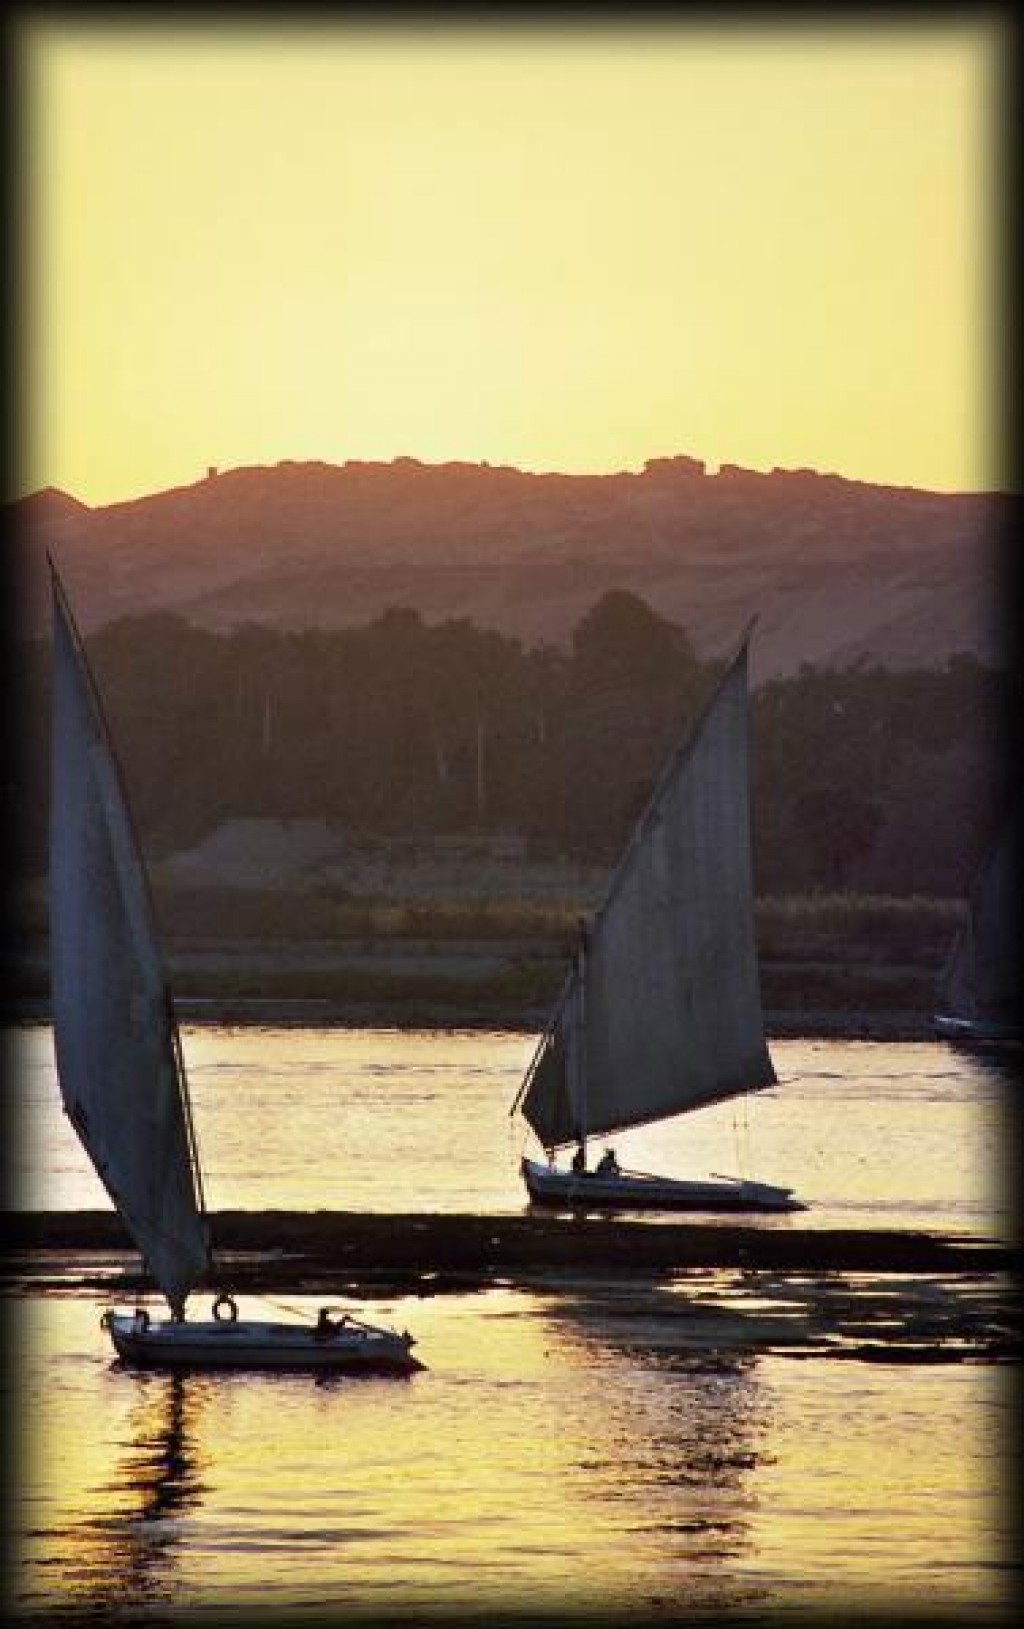 Back in Aswan, we watched the sun set on the Nile from the corniche.